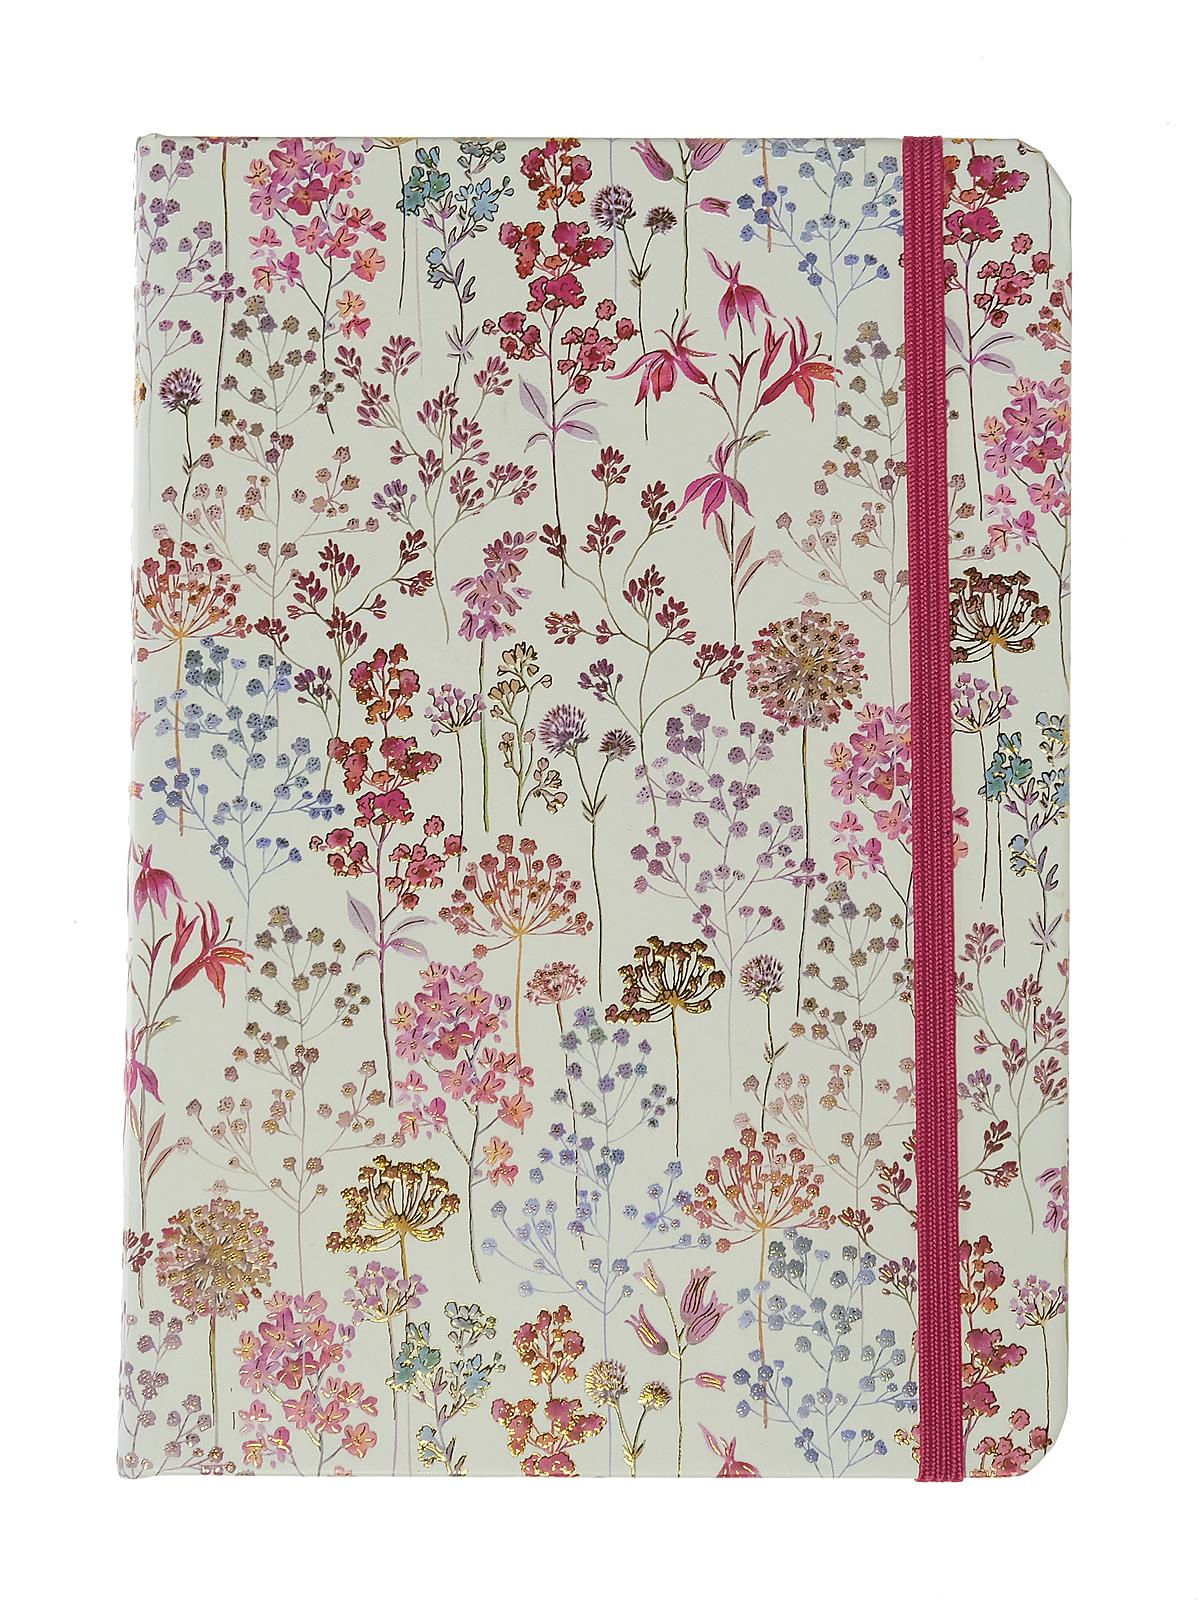 Small Format Journals Wildflower Meadow 5 In. X 7 In. 160 Pages, Lined